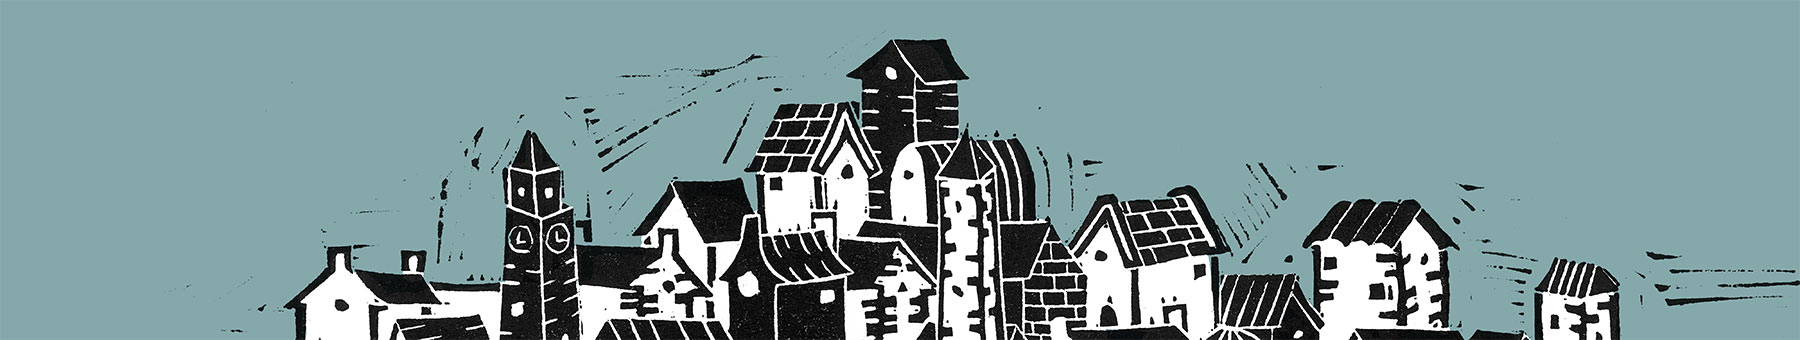 linocut of houses on a hill